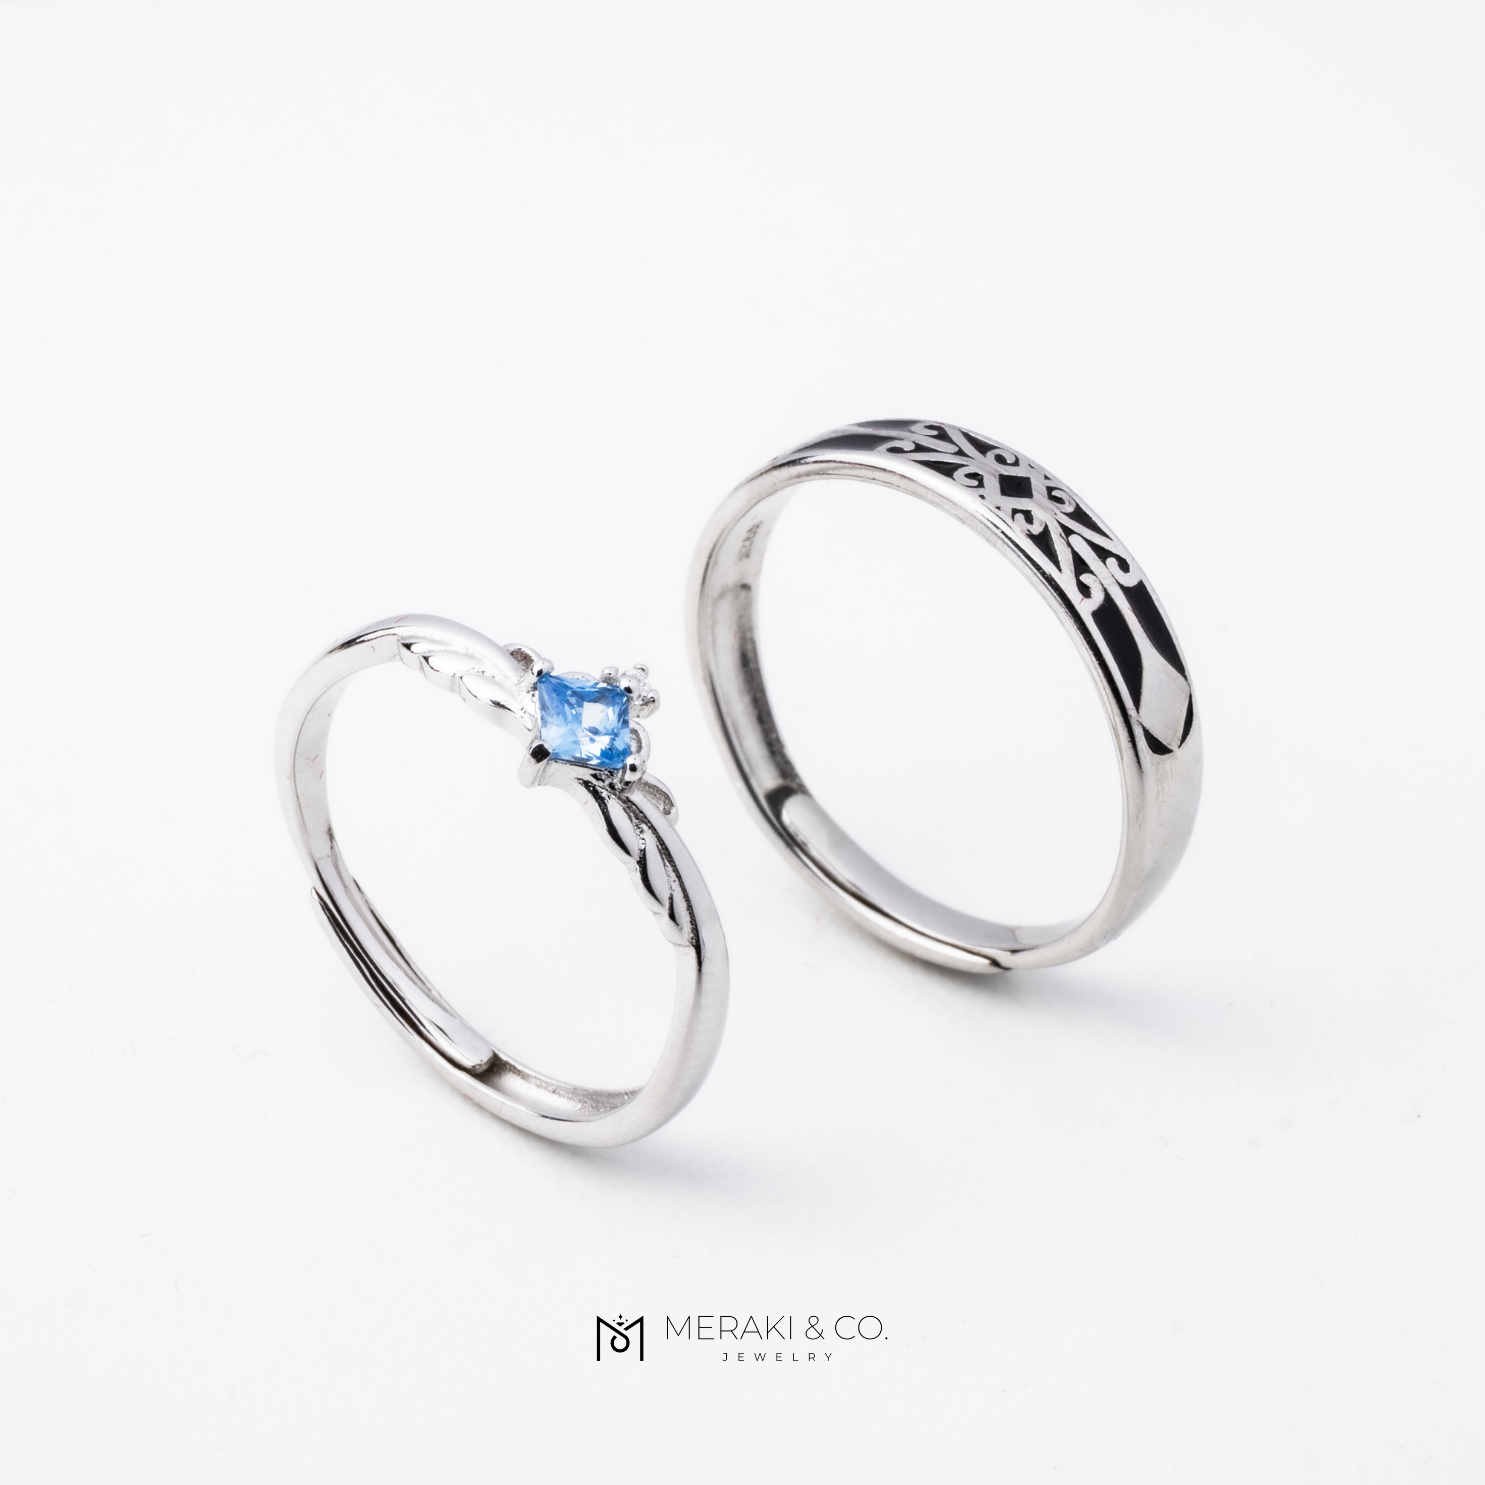 mnjin for couple gift lovers fashion silver ring 925 adjustable ring  jewelry couple rings silver - Walmart.com